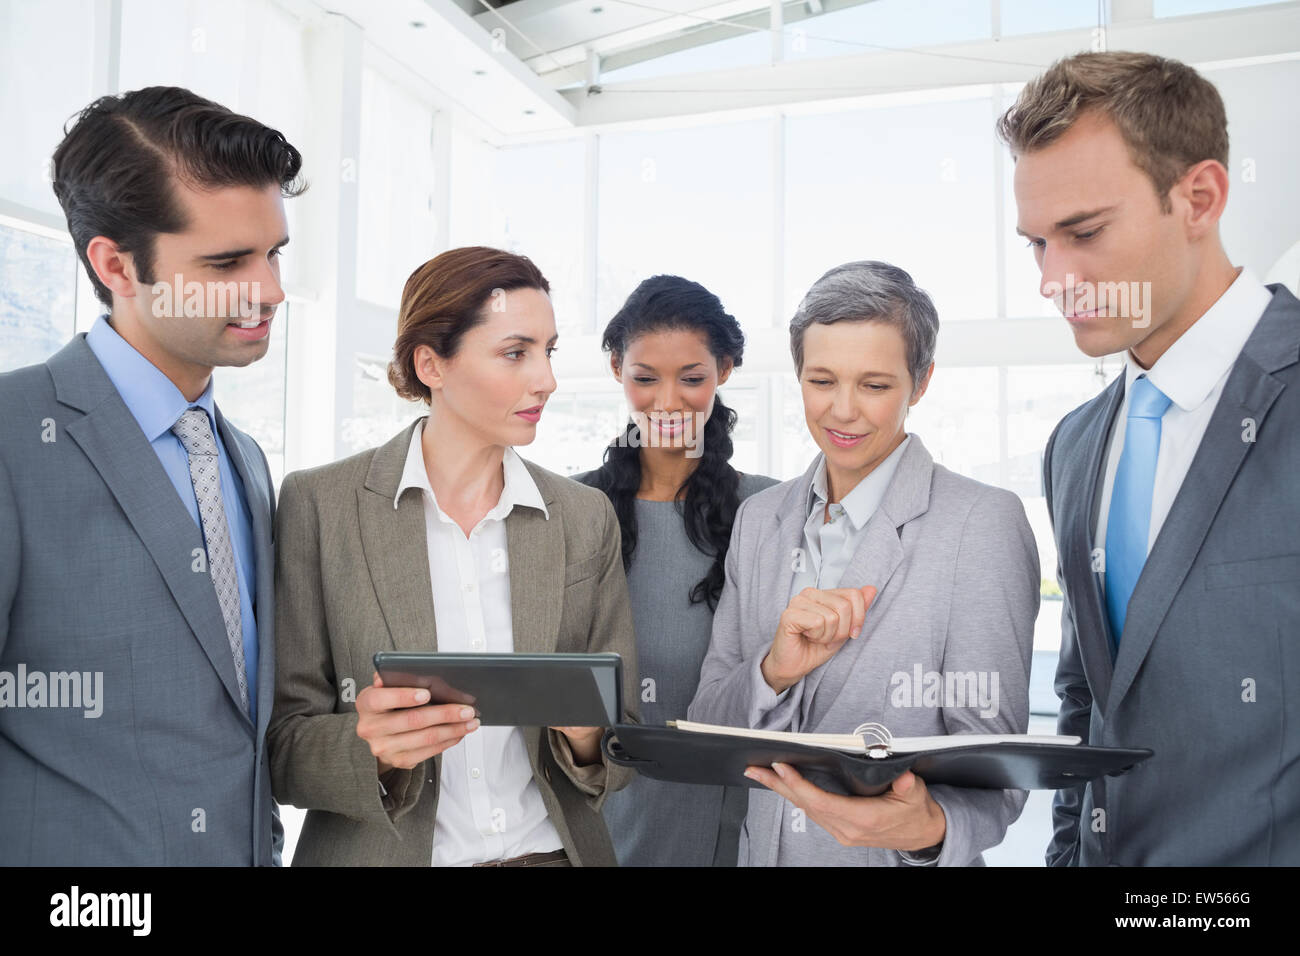 Business people with tablet and notebook Stock Photo